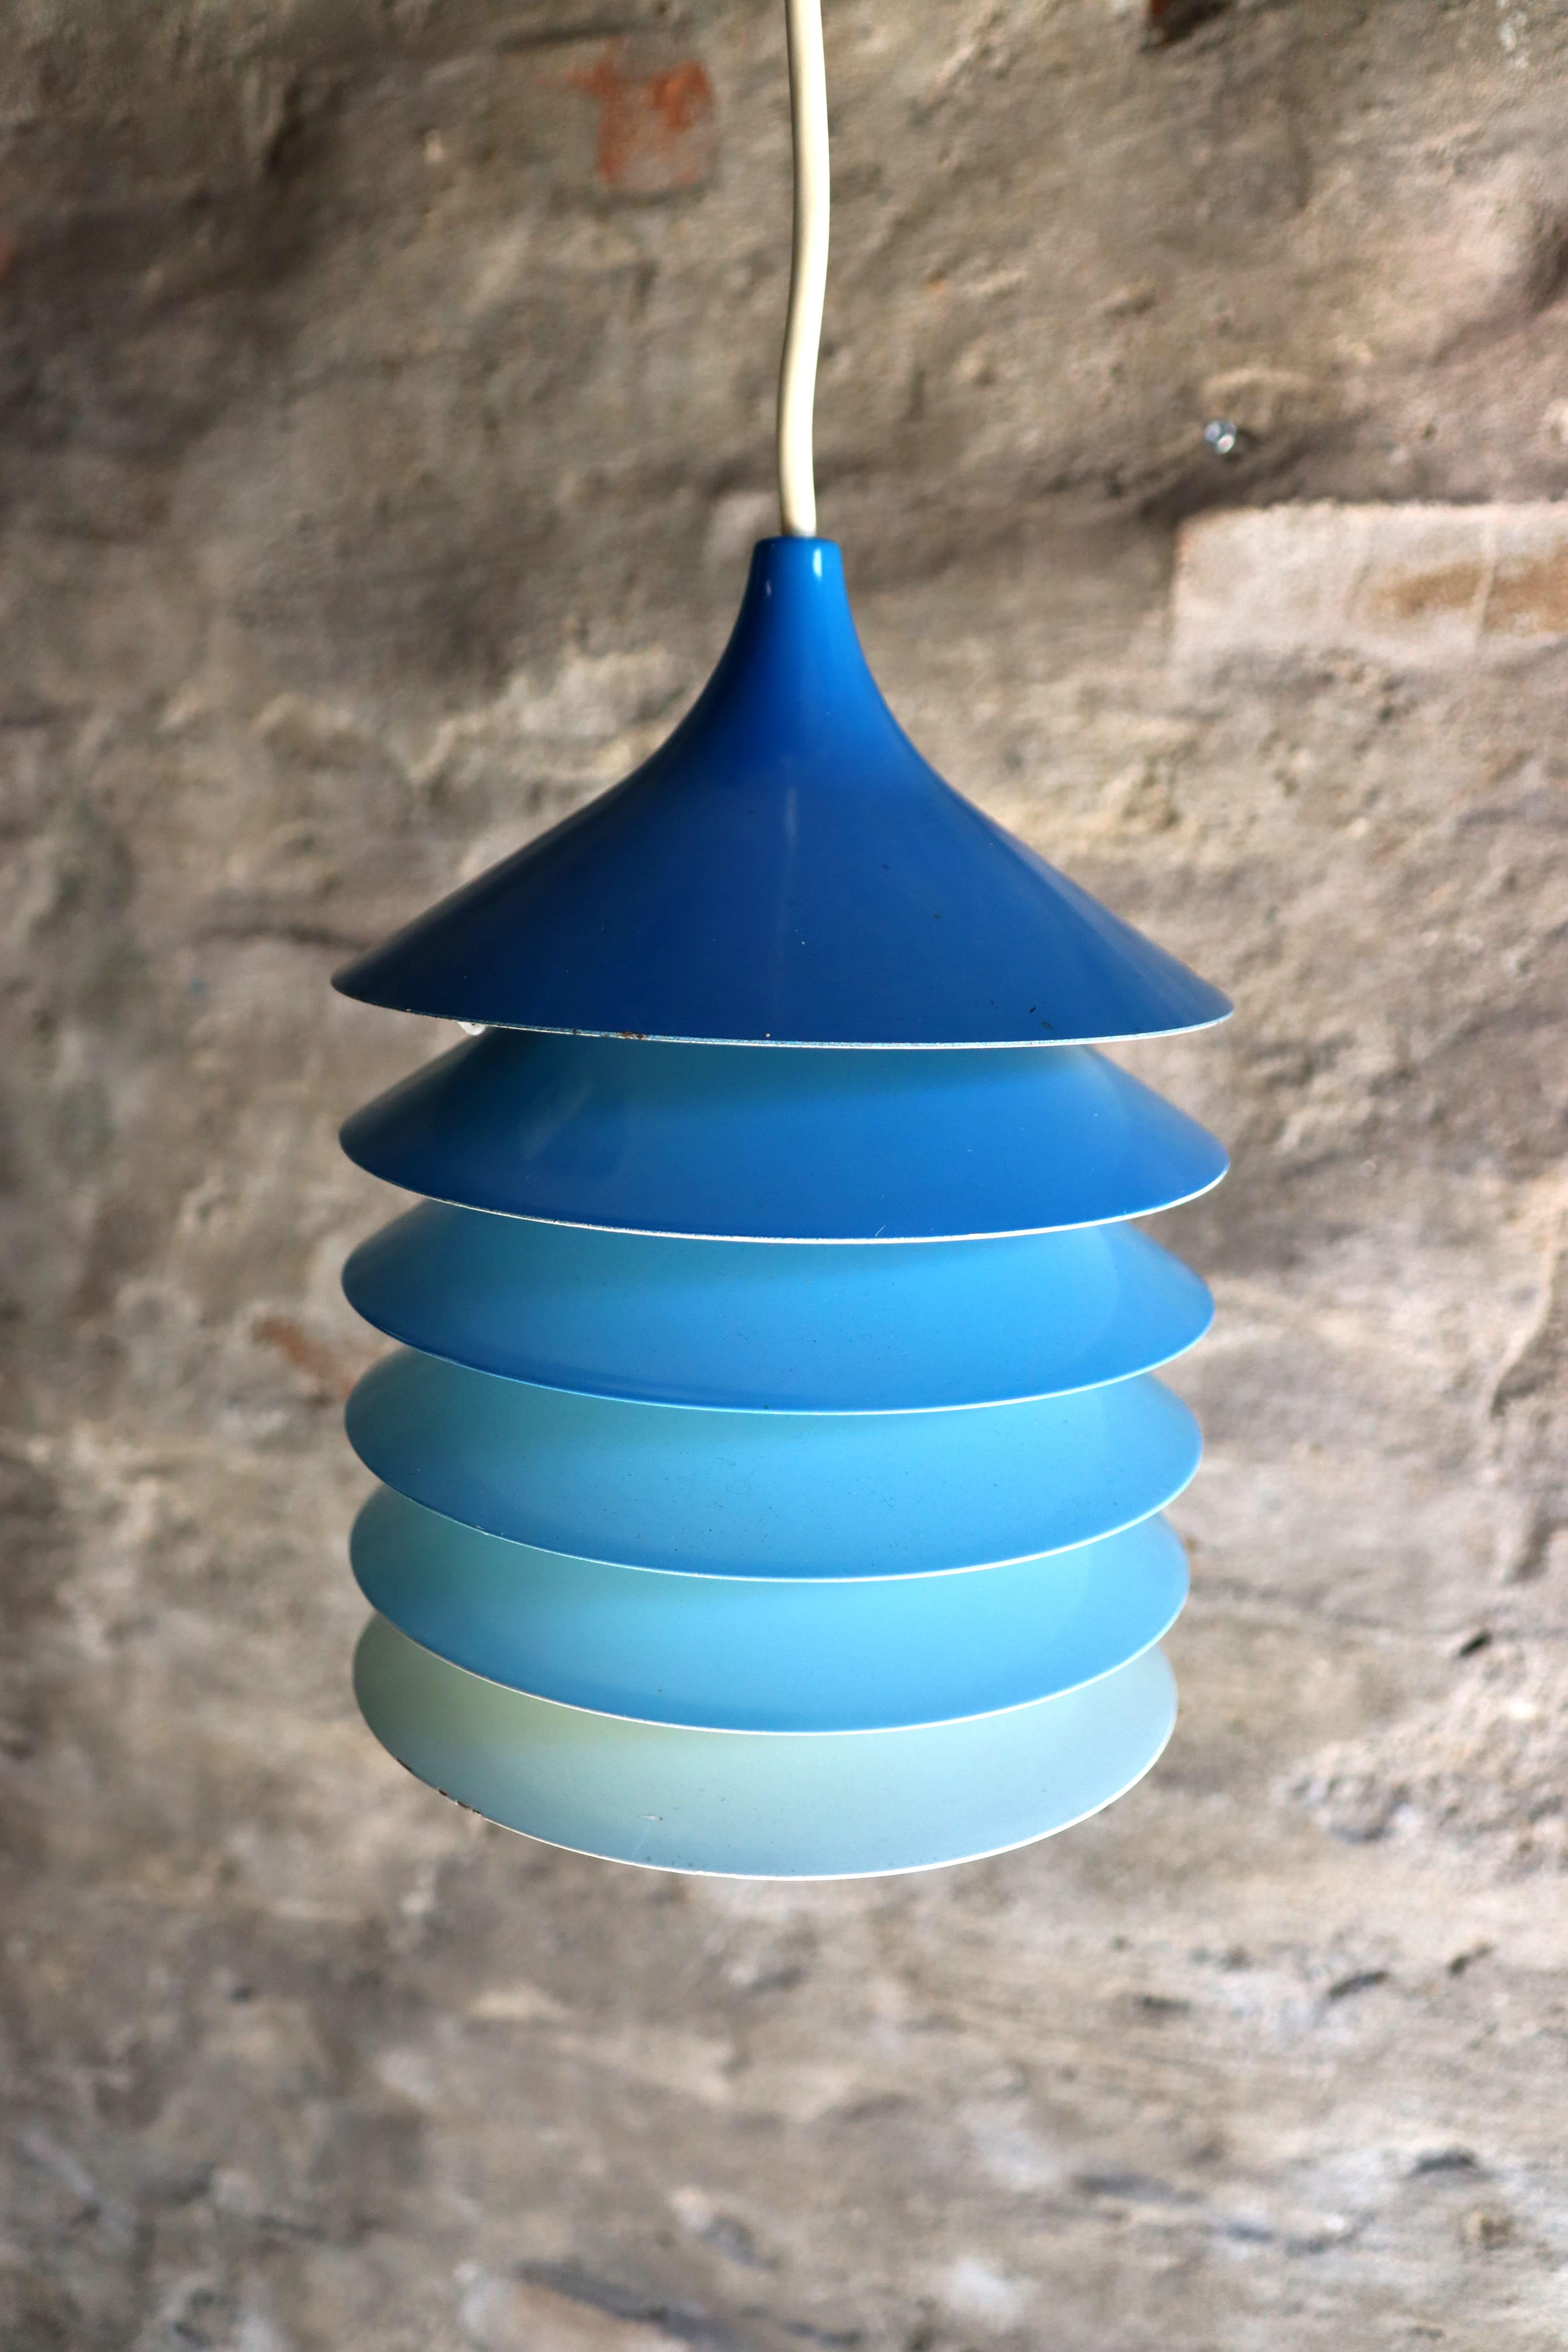 Materials: White round metal (aluminium) stacking discs lampshade. Painted in blue color gradient.
Period: 1980s.
Designer: Bent Gantzel-Boysen in 1983.
Manufacturer: IKEA
Other versions: The IKEA Duett pendant lamp exists in white, blue, red,